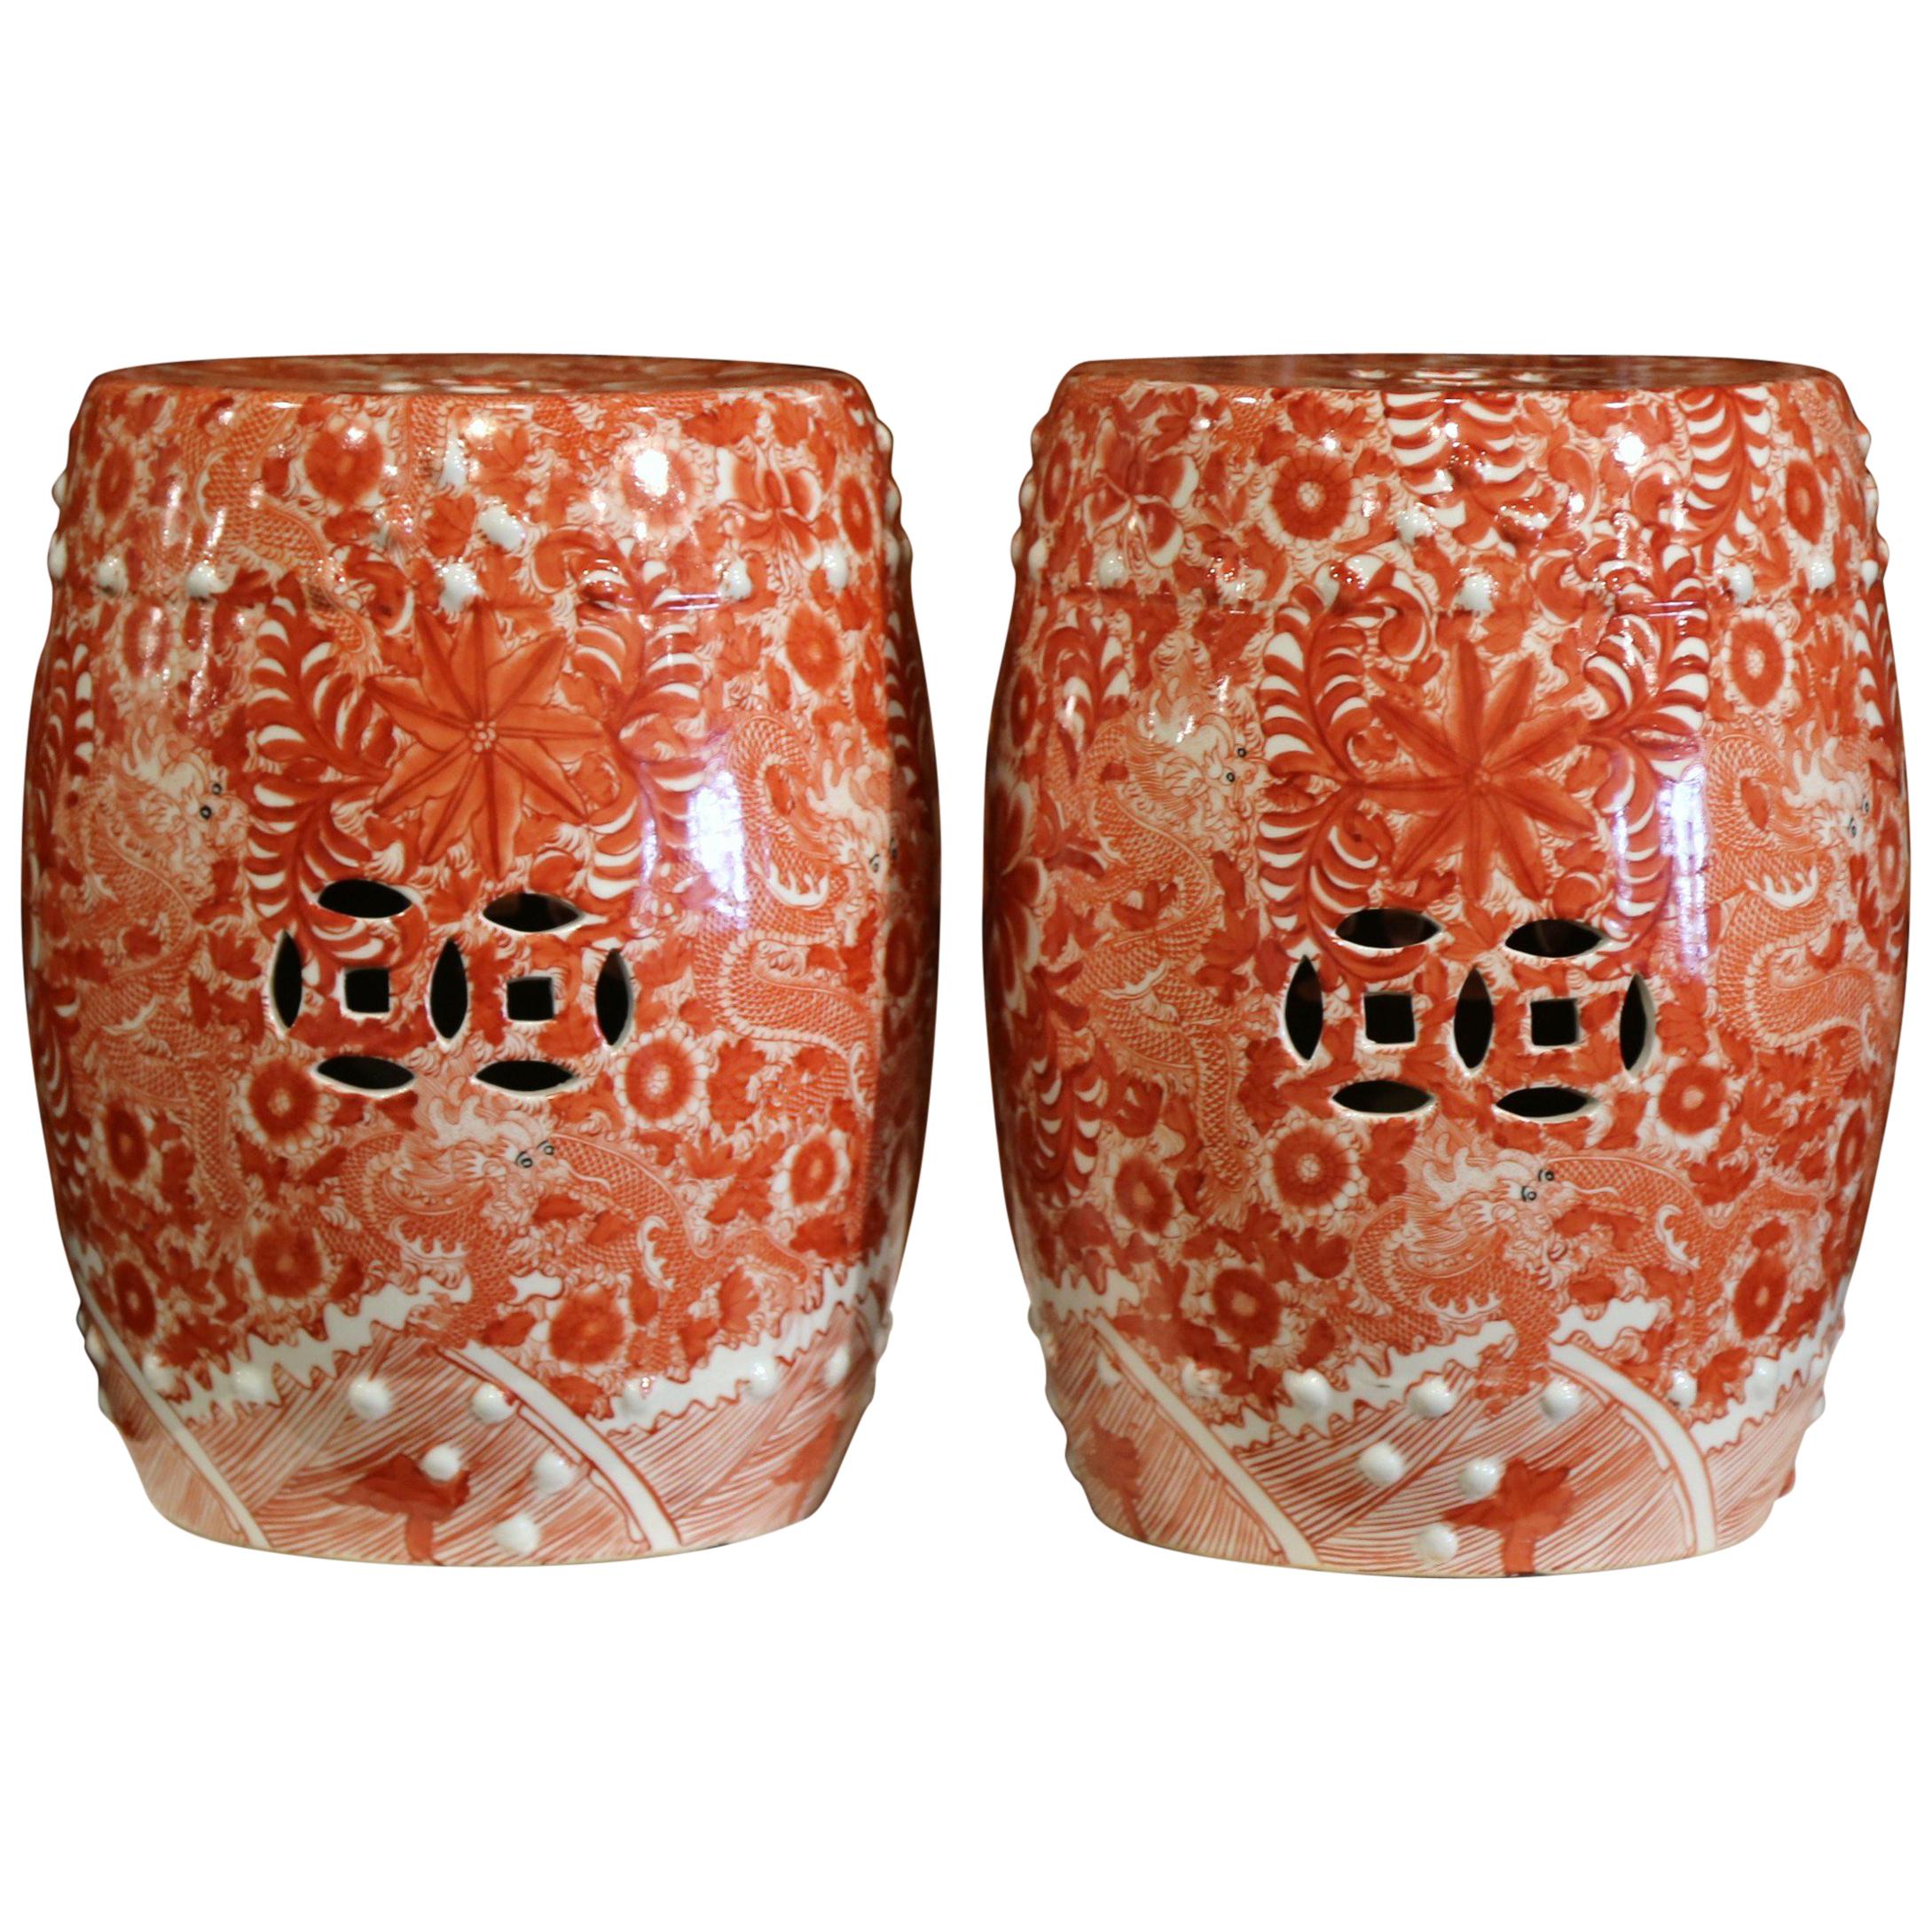 Pair of Mid-20th Century Chinese Porcelain Garden Stools with Dragon Motif